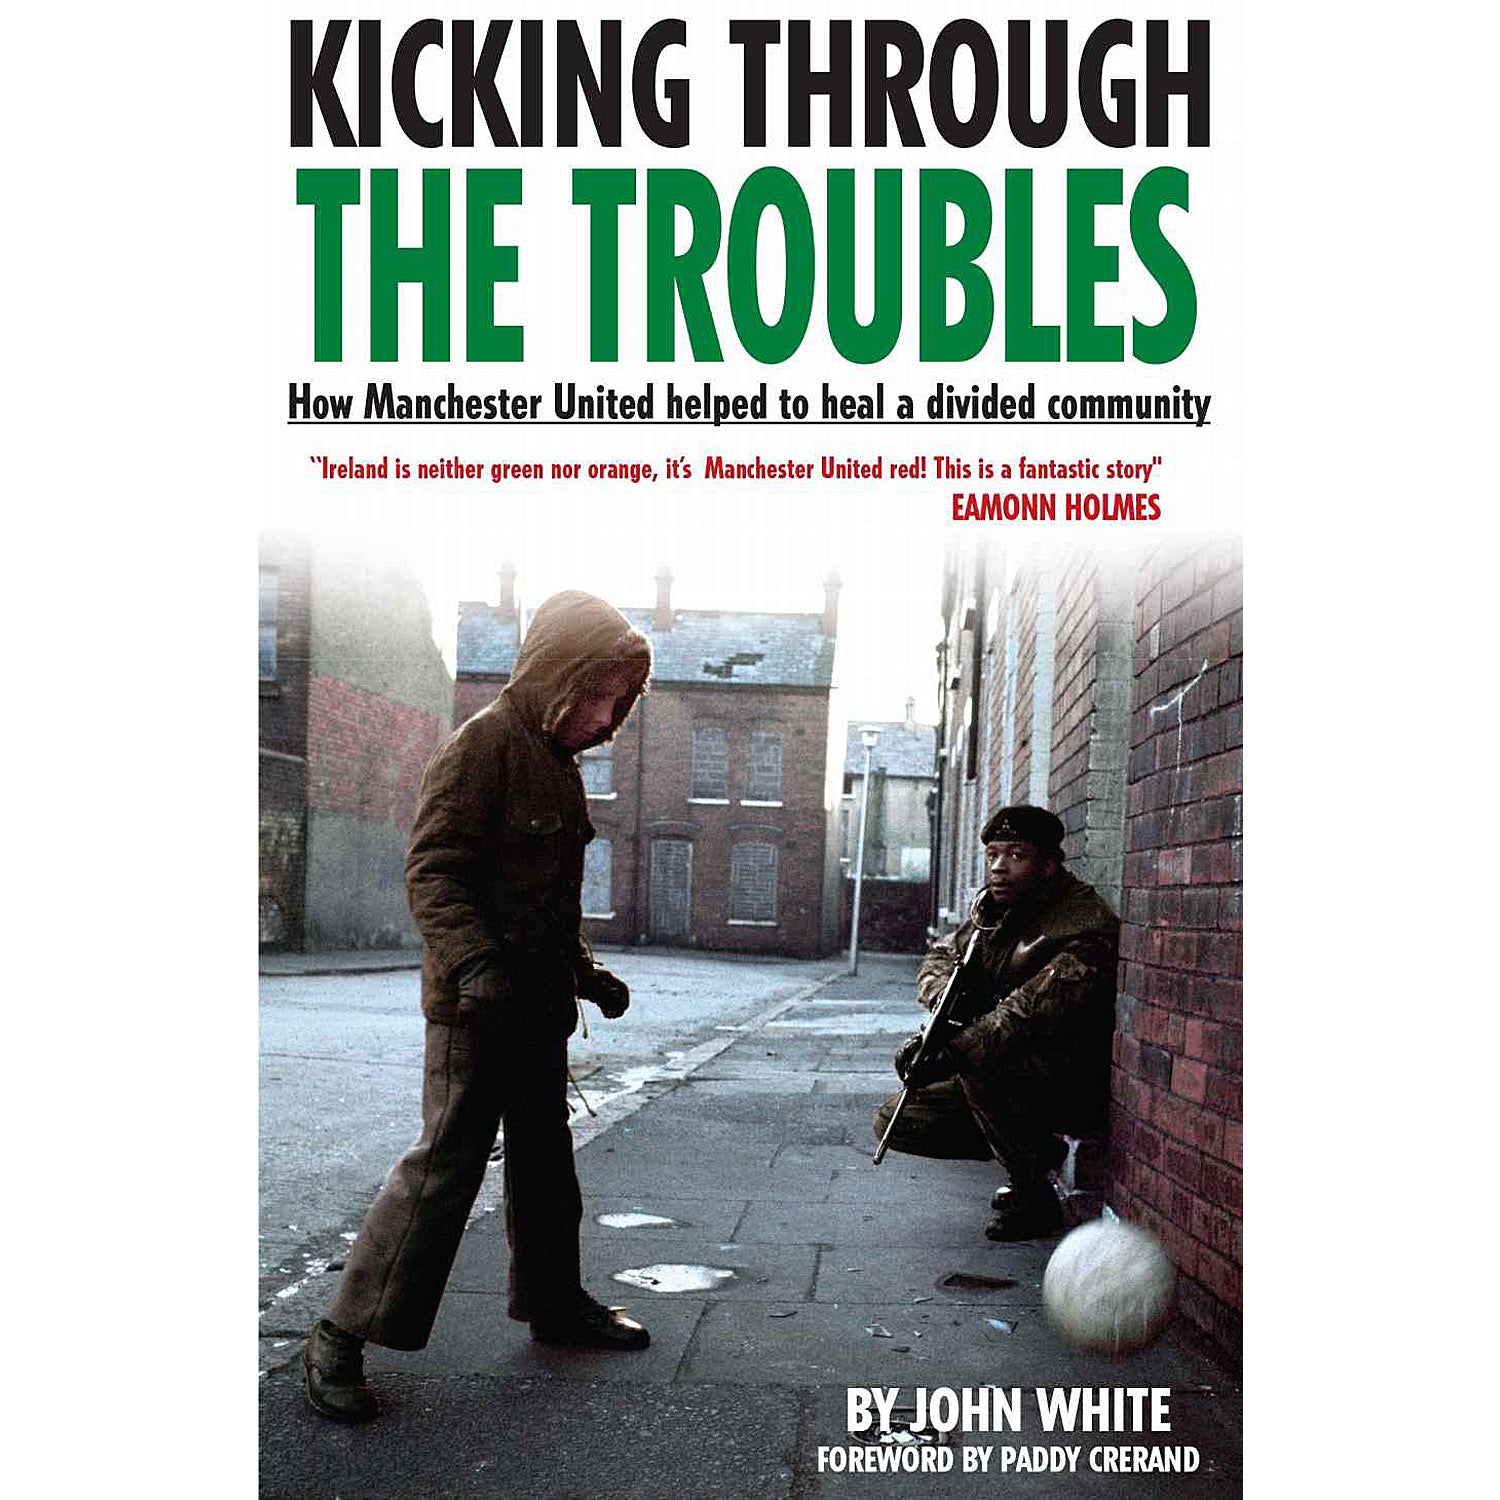 Kicking Through The Troubles – How Manchester United helped to heal a divided community